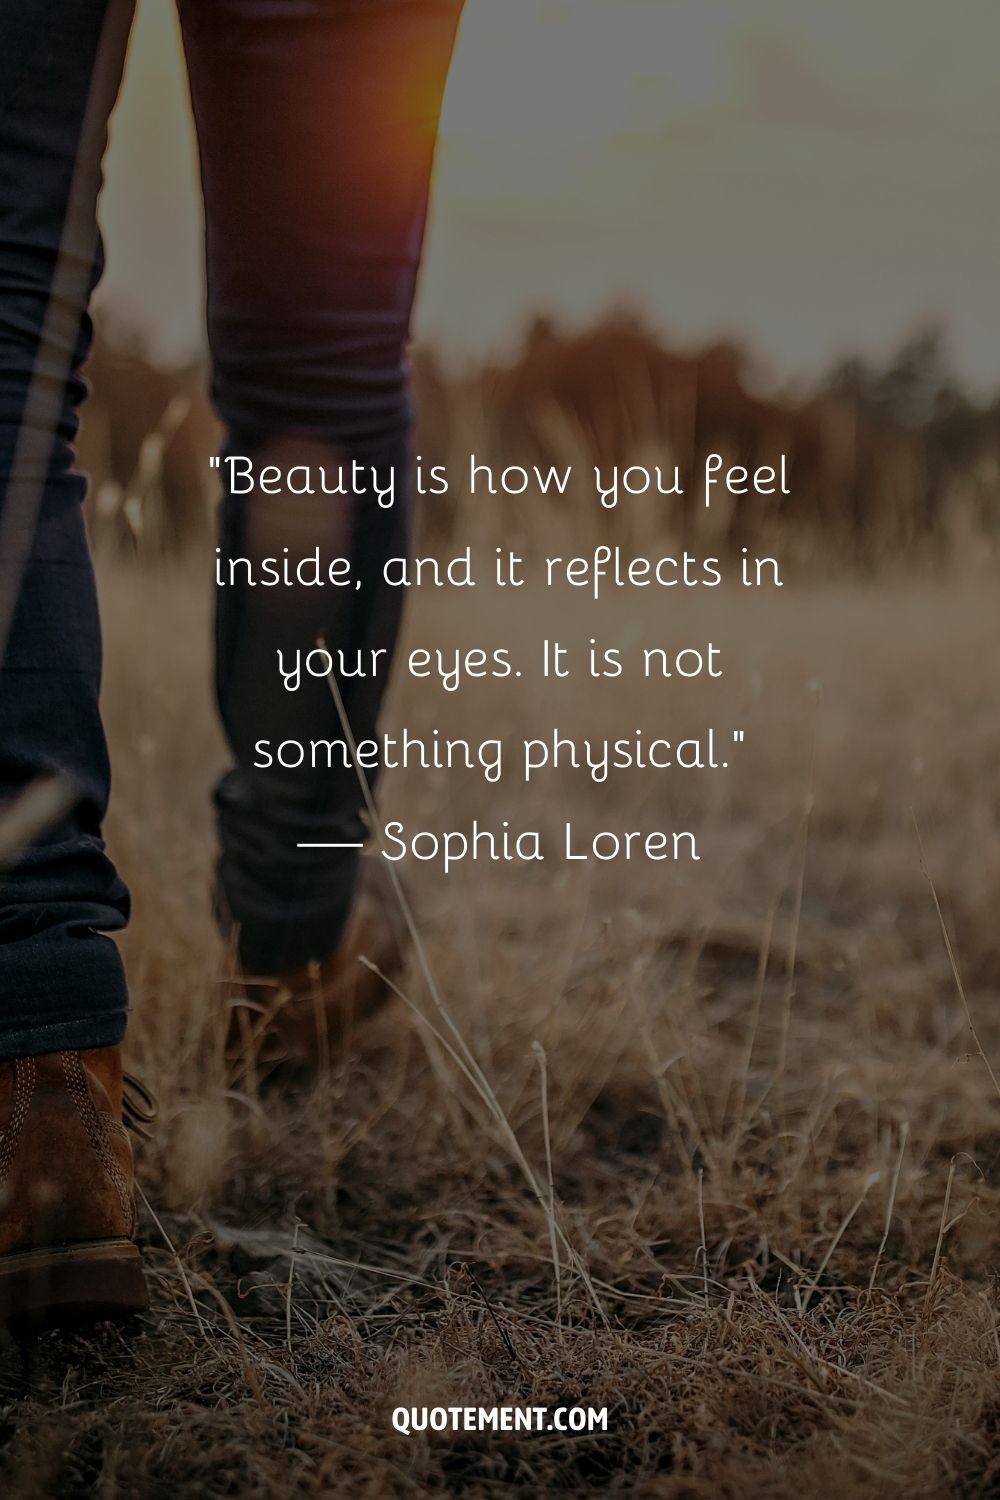 Beauty is how you feel inside, and it reflects in your eyes. It is not something physical. — Sophia Loren